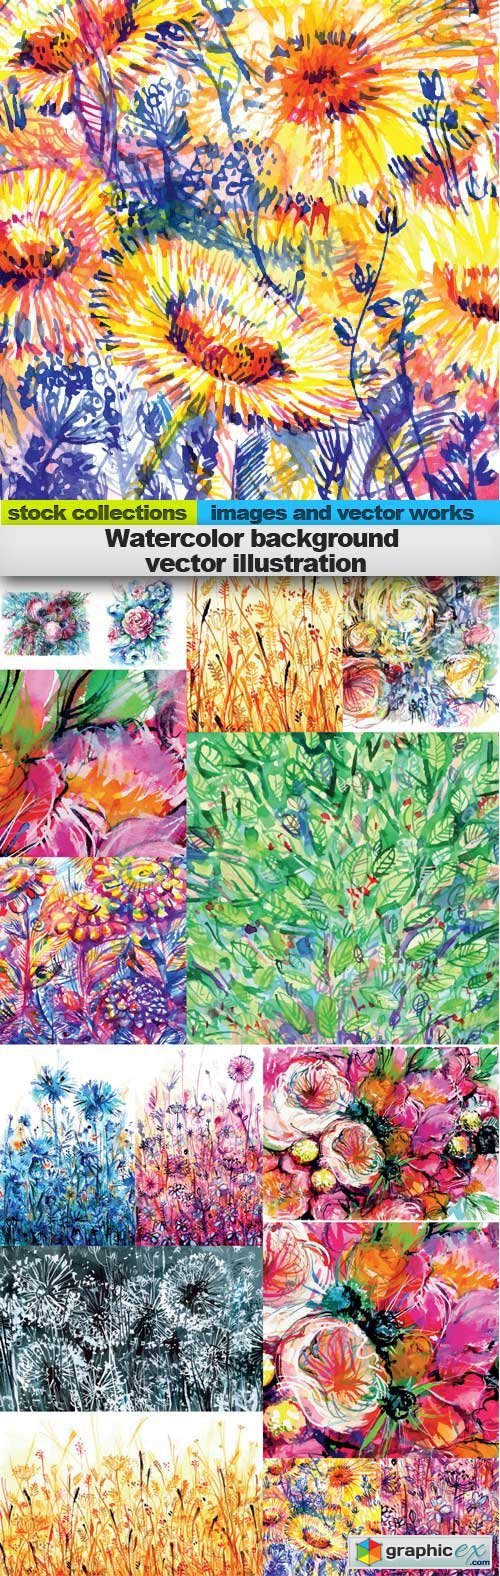 Watercolor background vector illustration, 15 x EPS